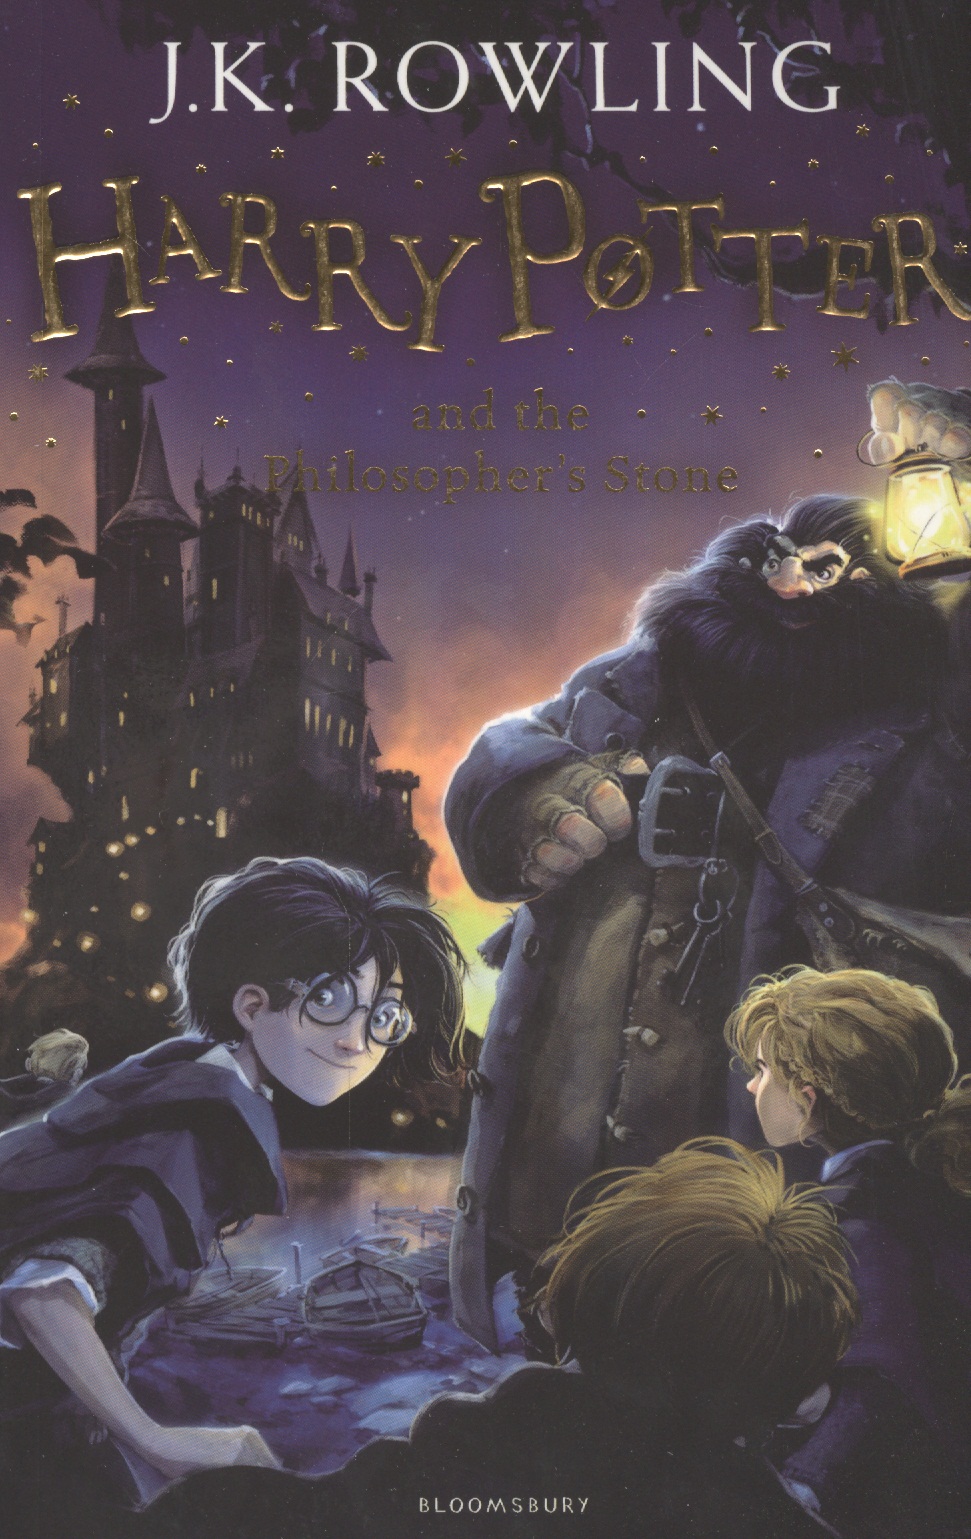 Harry Potter and the Philosophers Stone. (In reading order: 1) набор фигурка harry potter diagon alley rubeus hagrid with the leaky cauldron брелок snitch